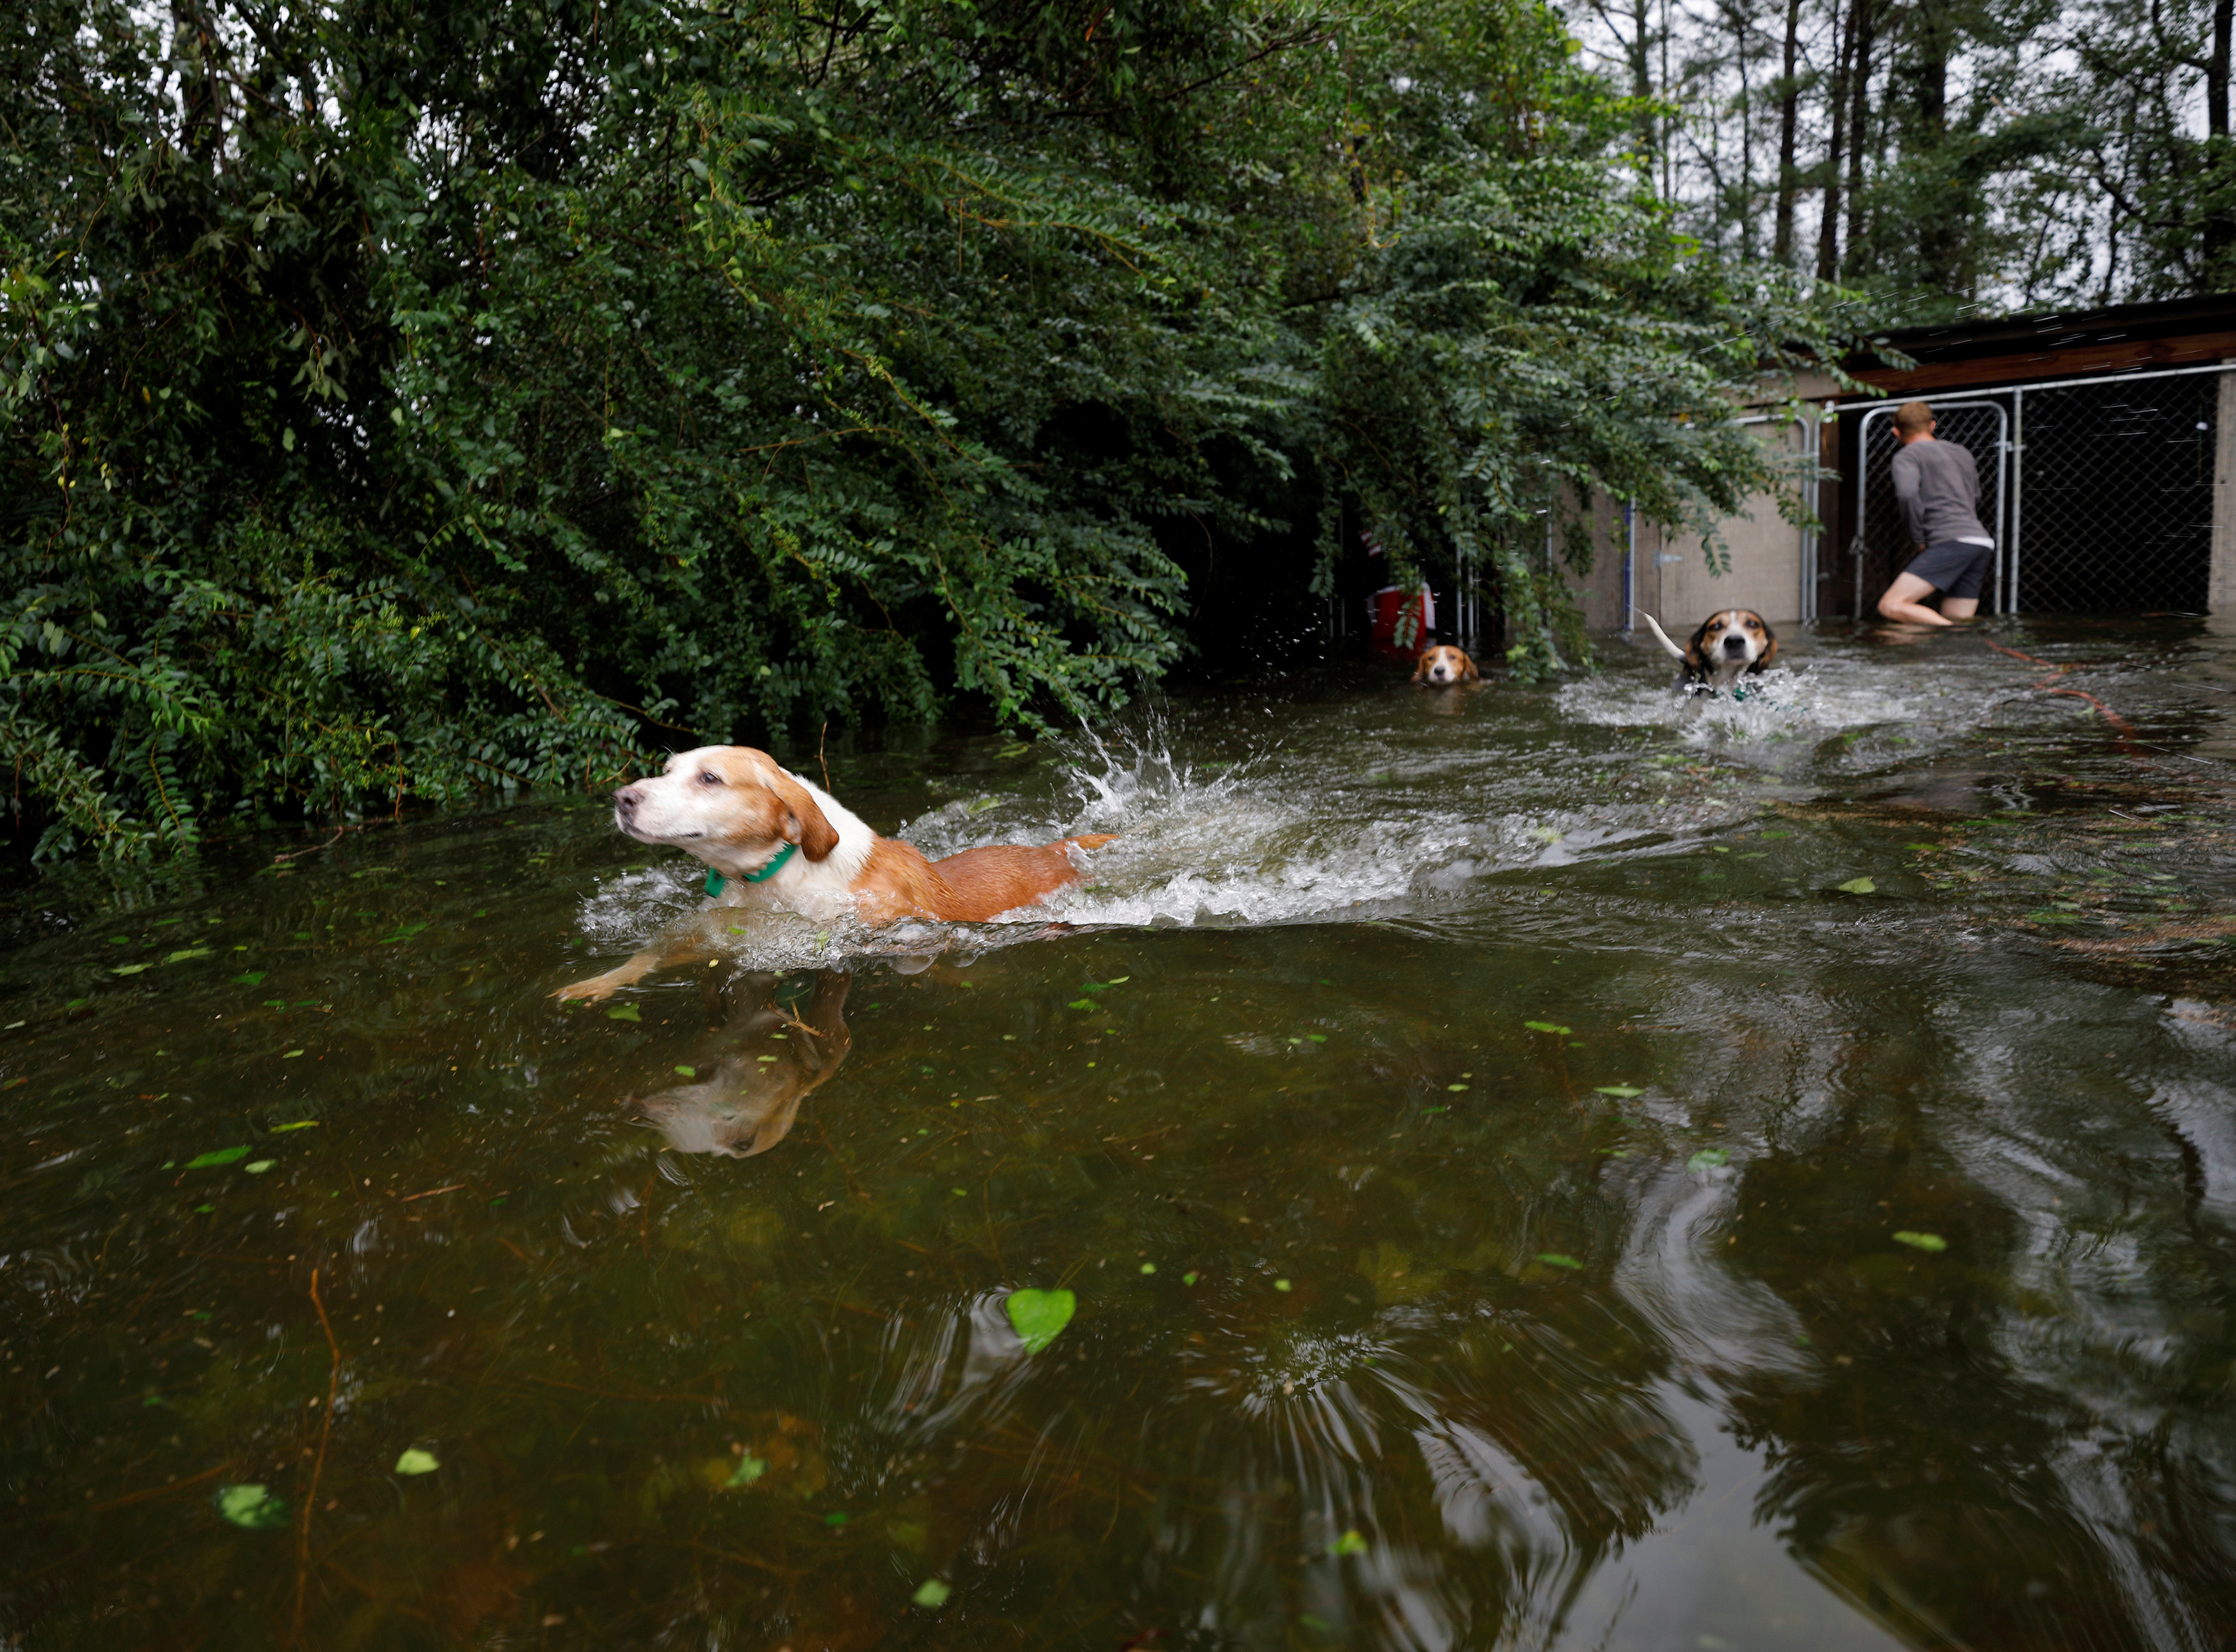 Panicked dogs that were left caged by an owner who fled rising flood waters in the aftermath of Hurricane Florence, swim free after their release in Leland, North Carolina, U.S., September 16, 2018. REUTERS/Jonathan Drake